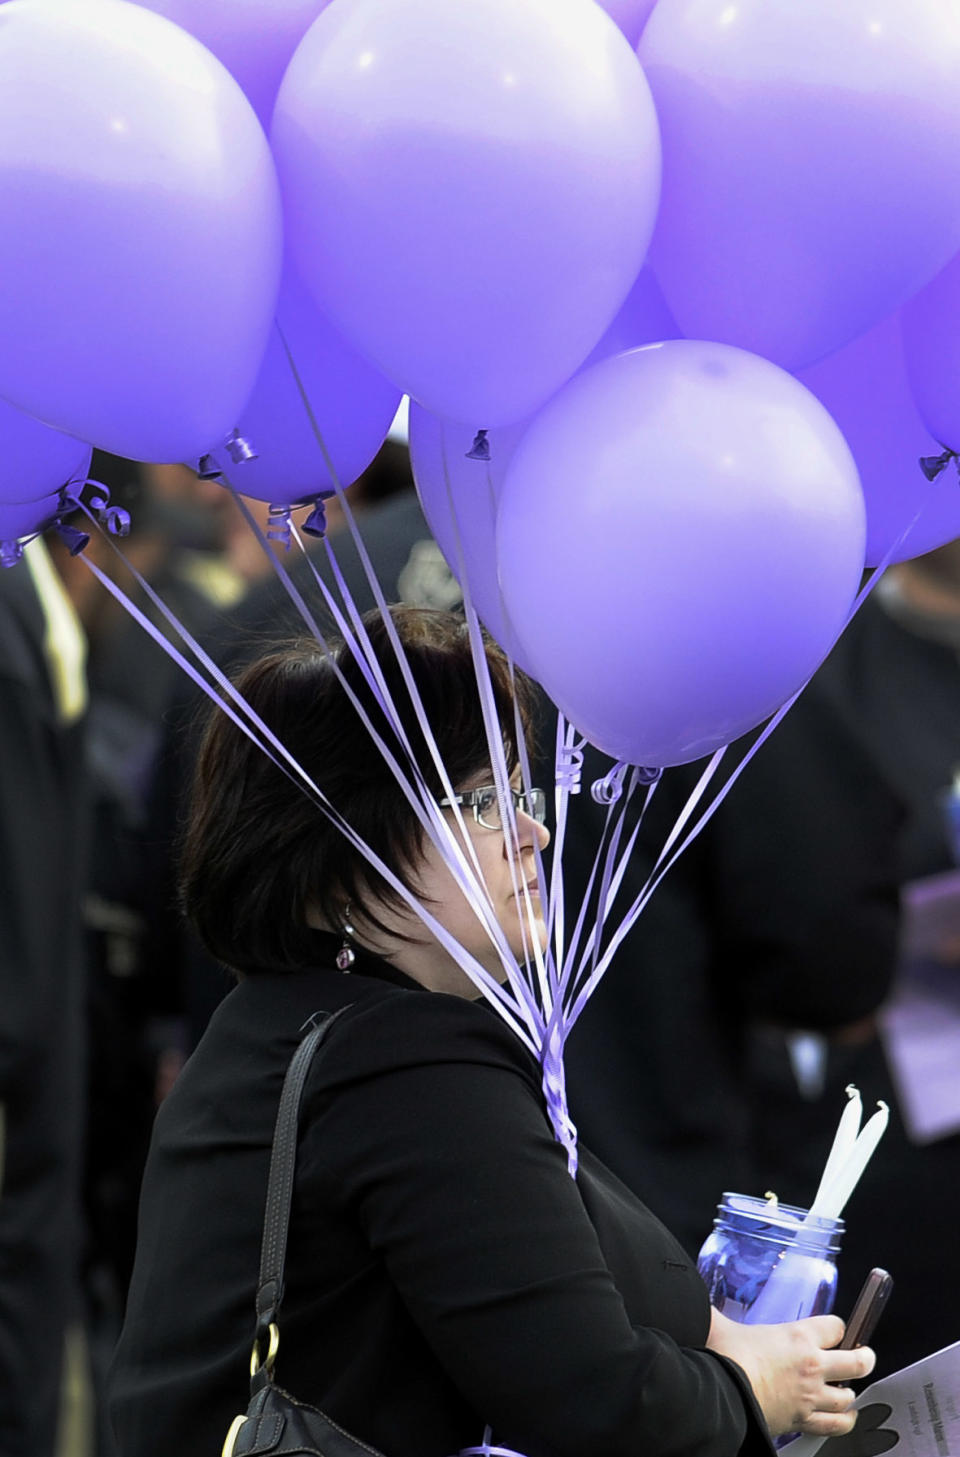 A woman carries balloons during a vigil for Maren Sanchez at Jonathan Law High School, Monday, April 28, 2014, in Milford, Conn. Sanchez was fatally stabbed inside the school on Friday hours before her junior prom. (AP Photo/Jessica Hill)